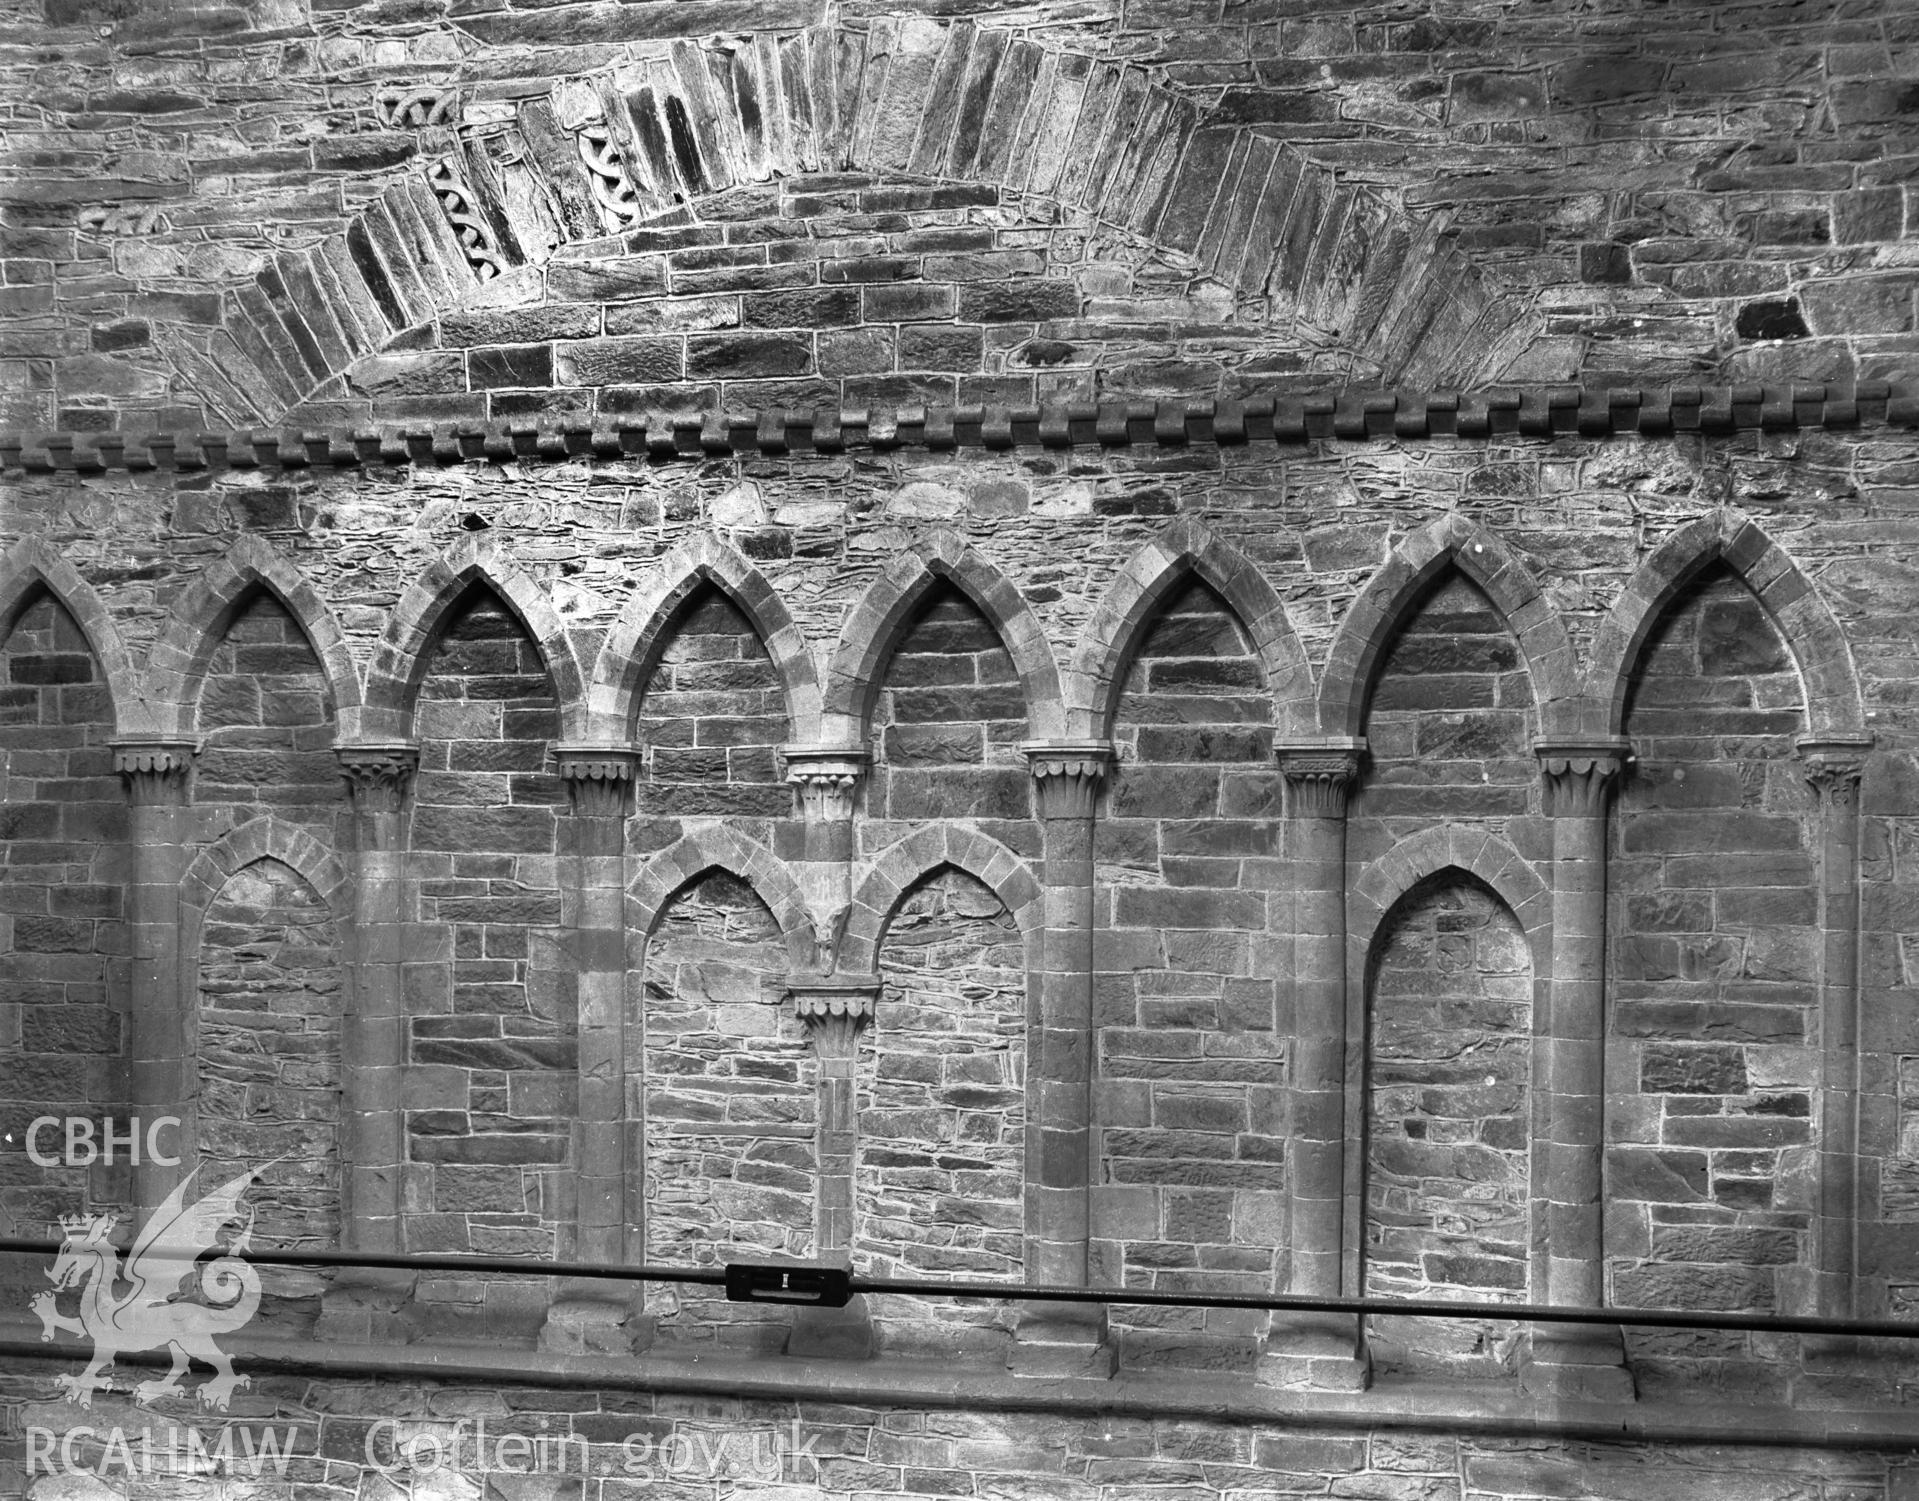 Interior view showing arcading on the west side of the tower, at triforium level.